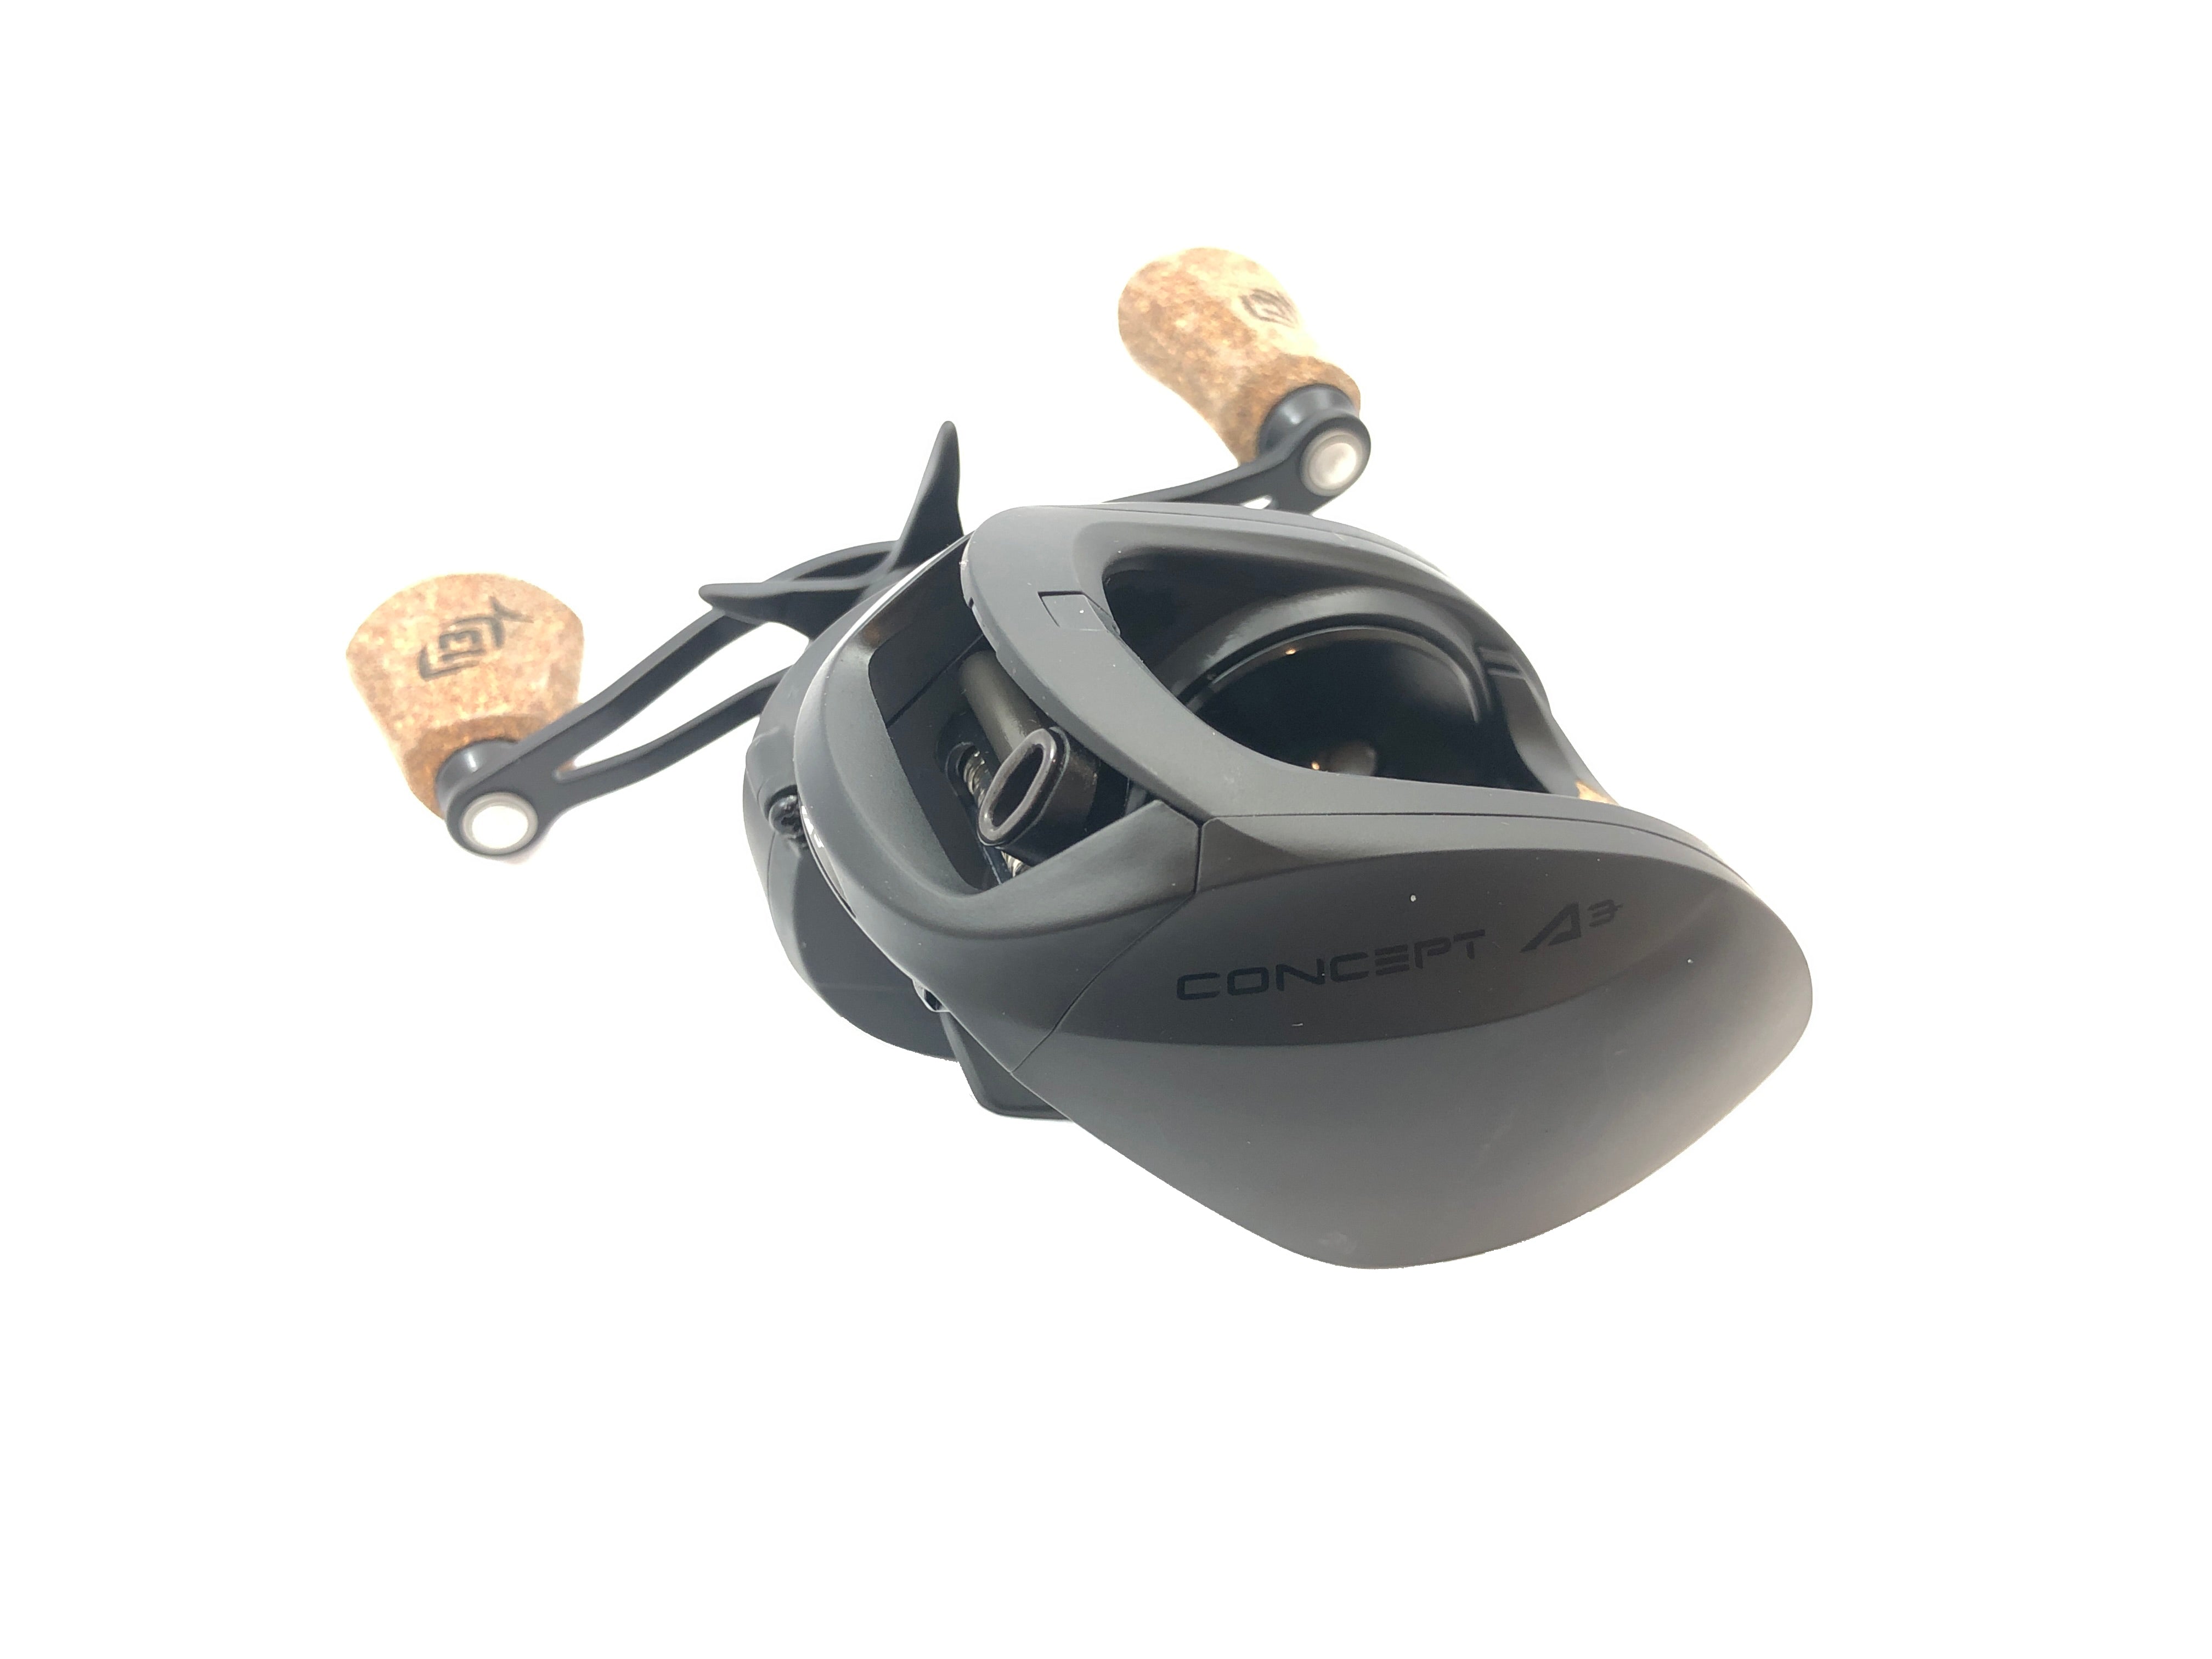 13 Fishing Concept A Low-Profile 8.1 Baitcasting Reel - Andy